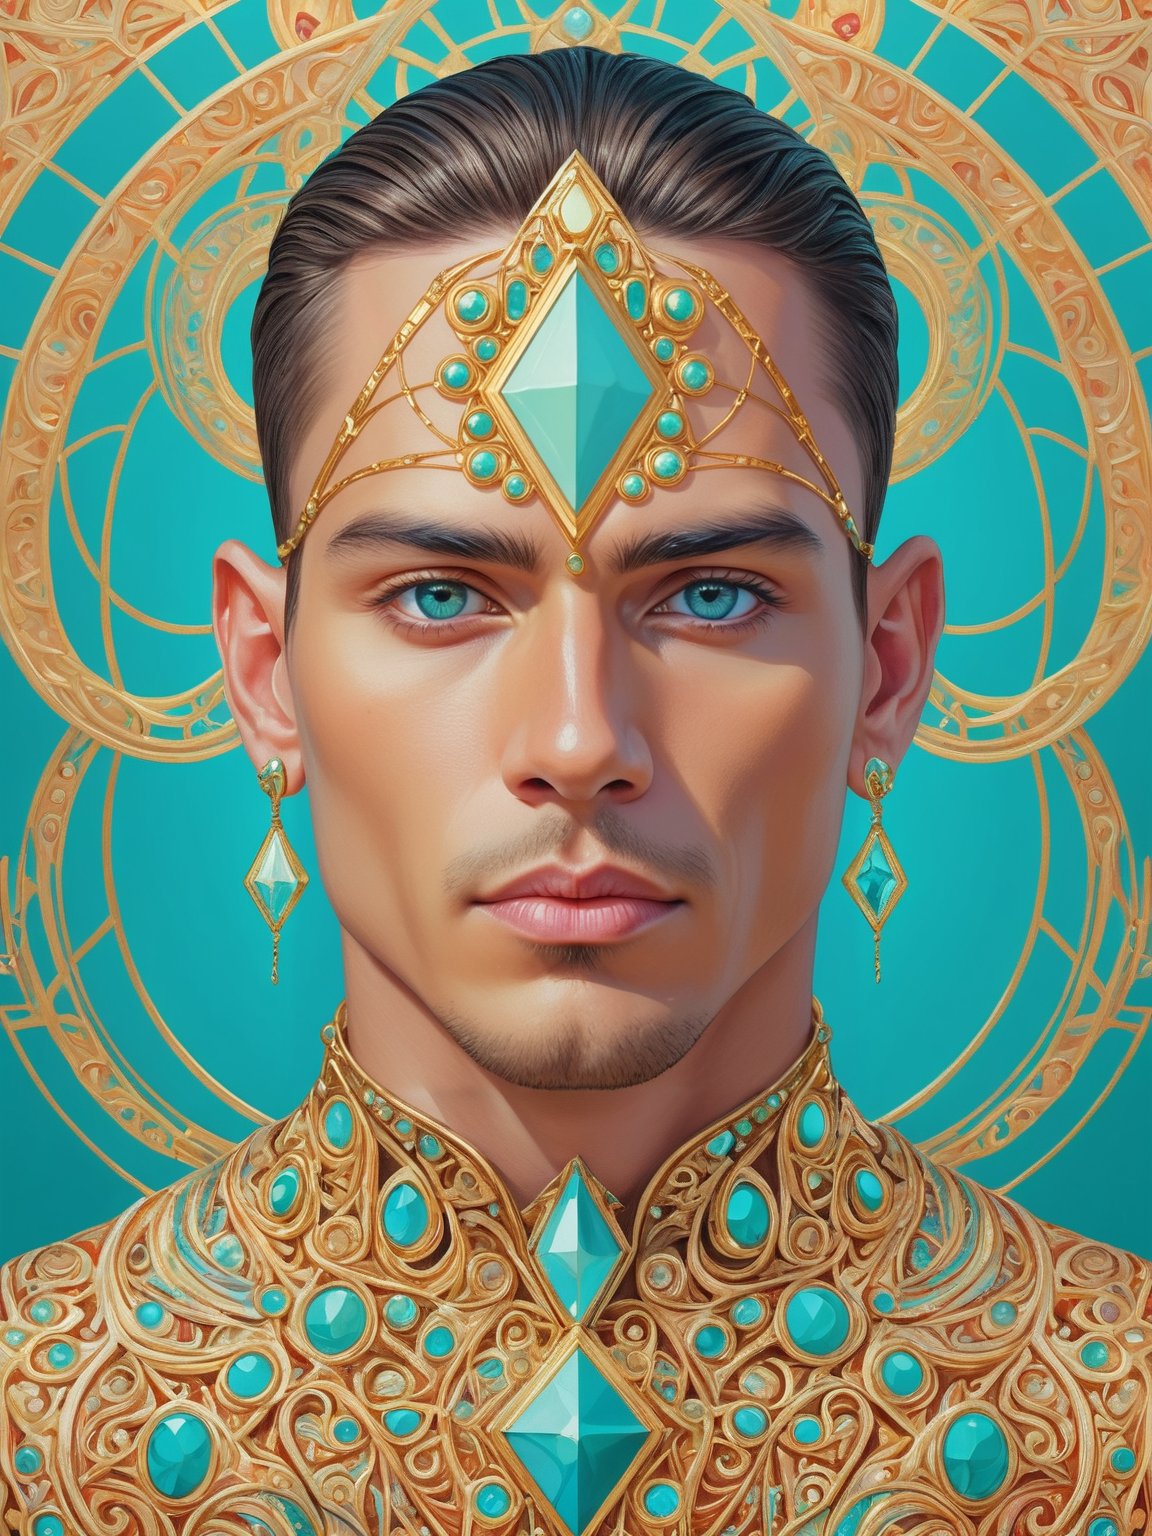 Intricate picture of a man symmetrical portrait made of a golden illustration with beautiful colors and lines and symmetrical features with pastel colors and shiny jewels on an ocean of turquoise